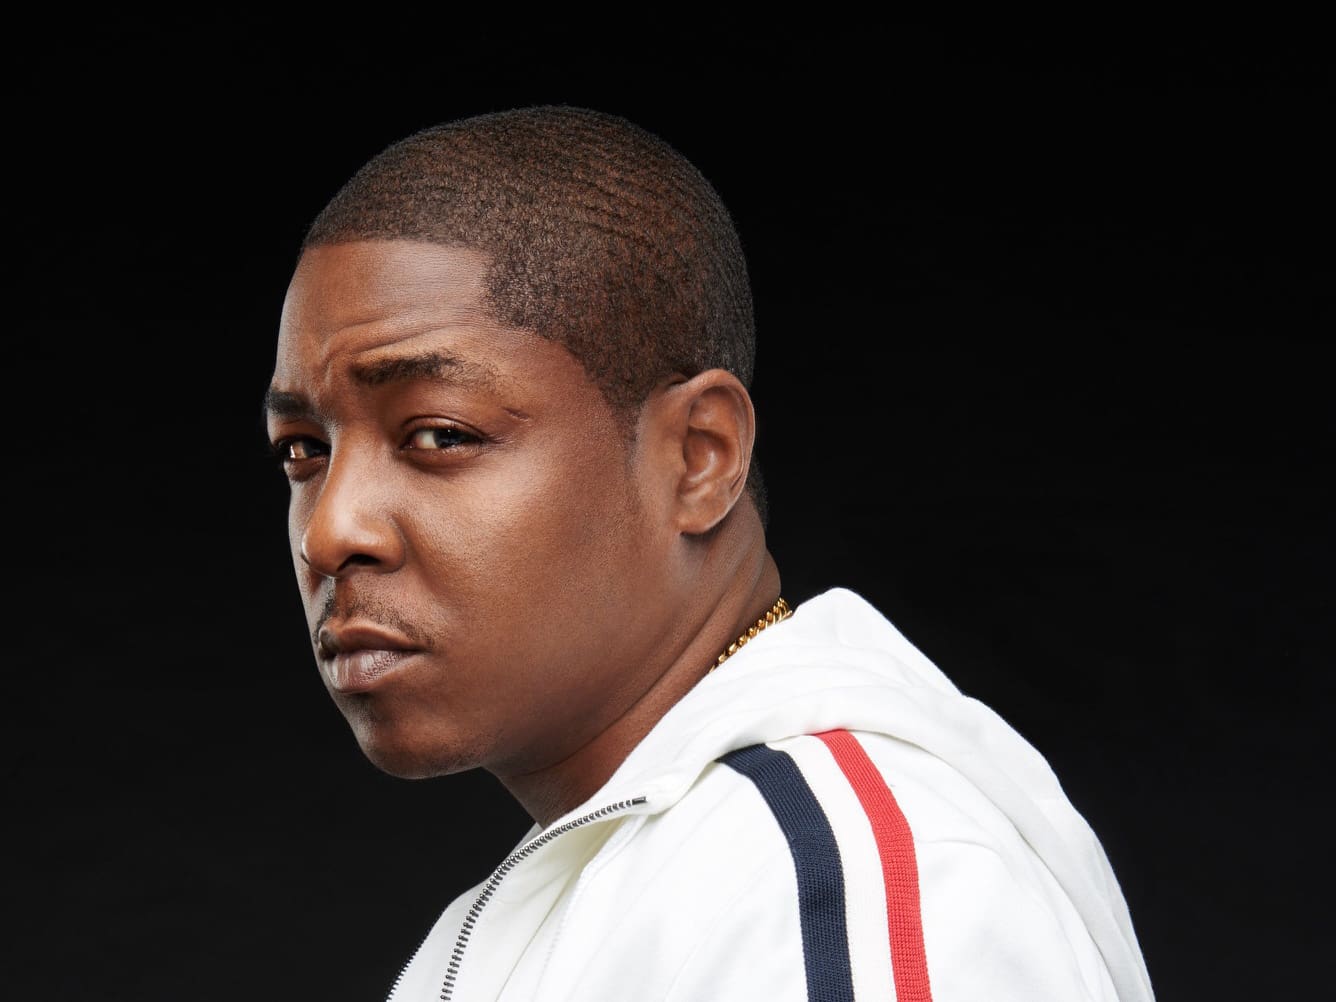 The 47-year old son of father (?) and mother(?) Jadakiss in 2023 photo. Jadakiss earned a  million dollar salary - leaving the net worth at 6 million in 2023